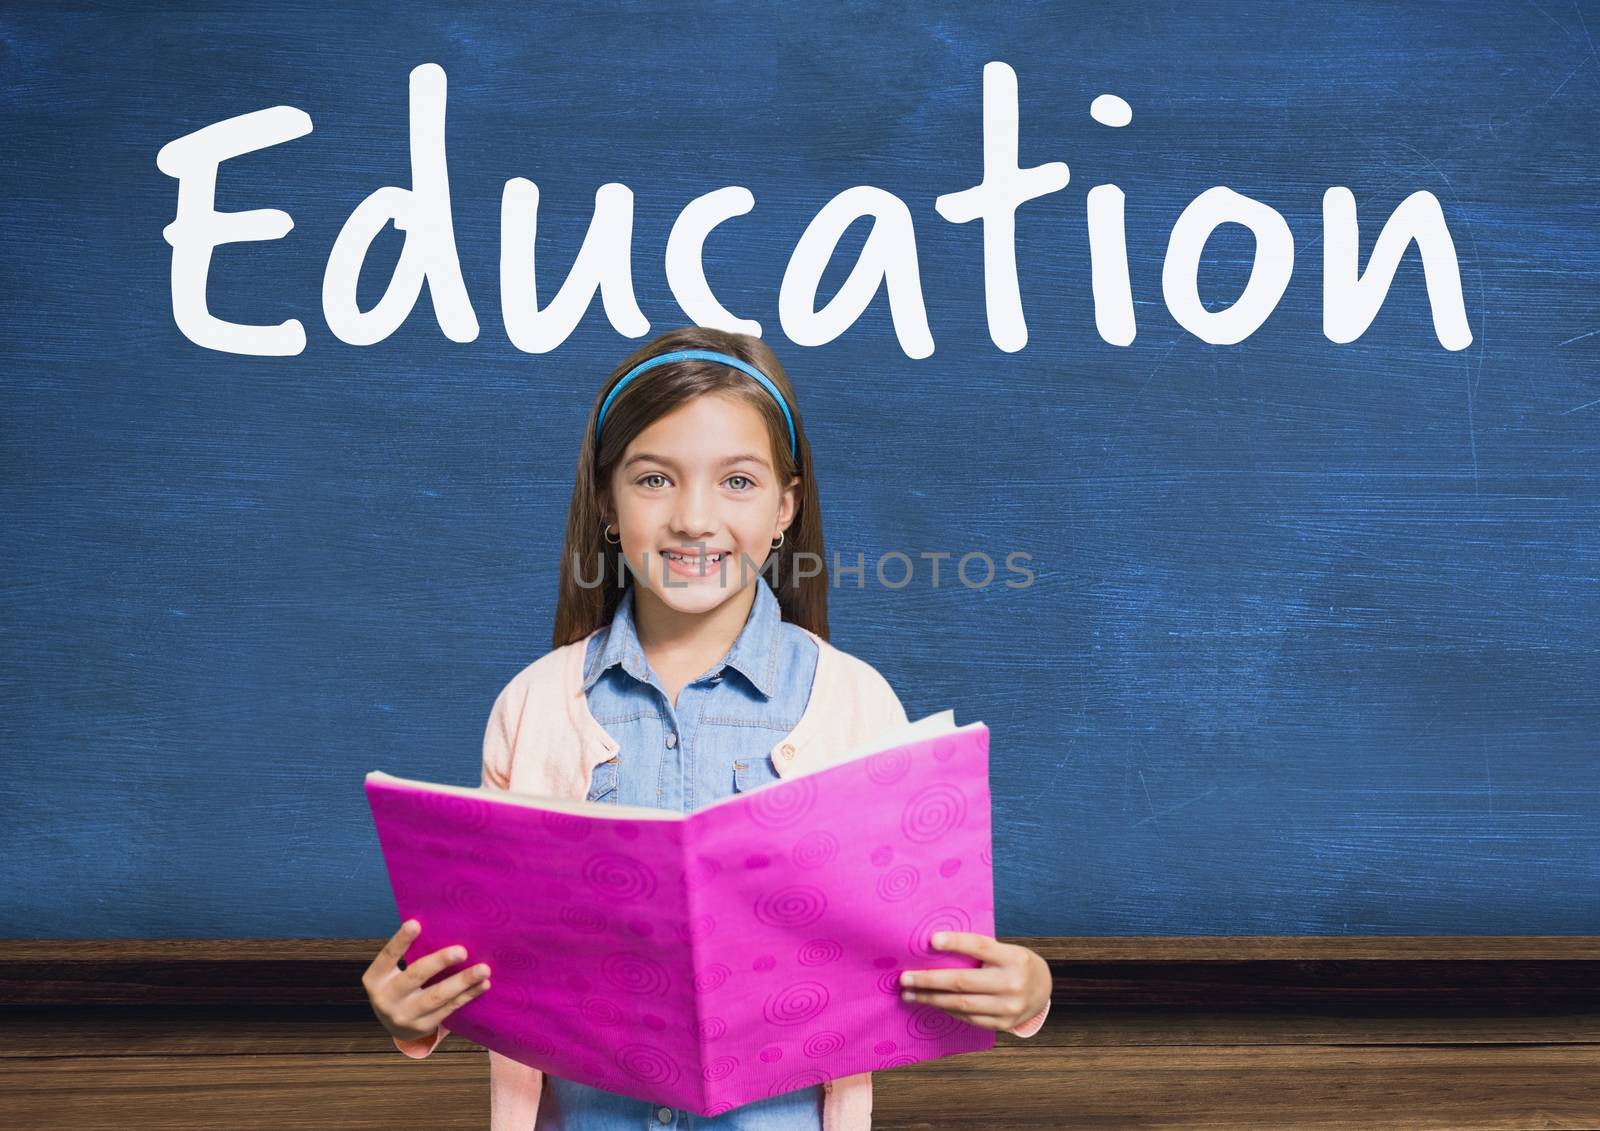 Digital composite of Education text on blackboard with girl reading